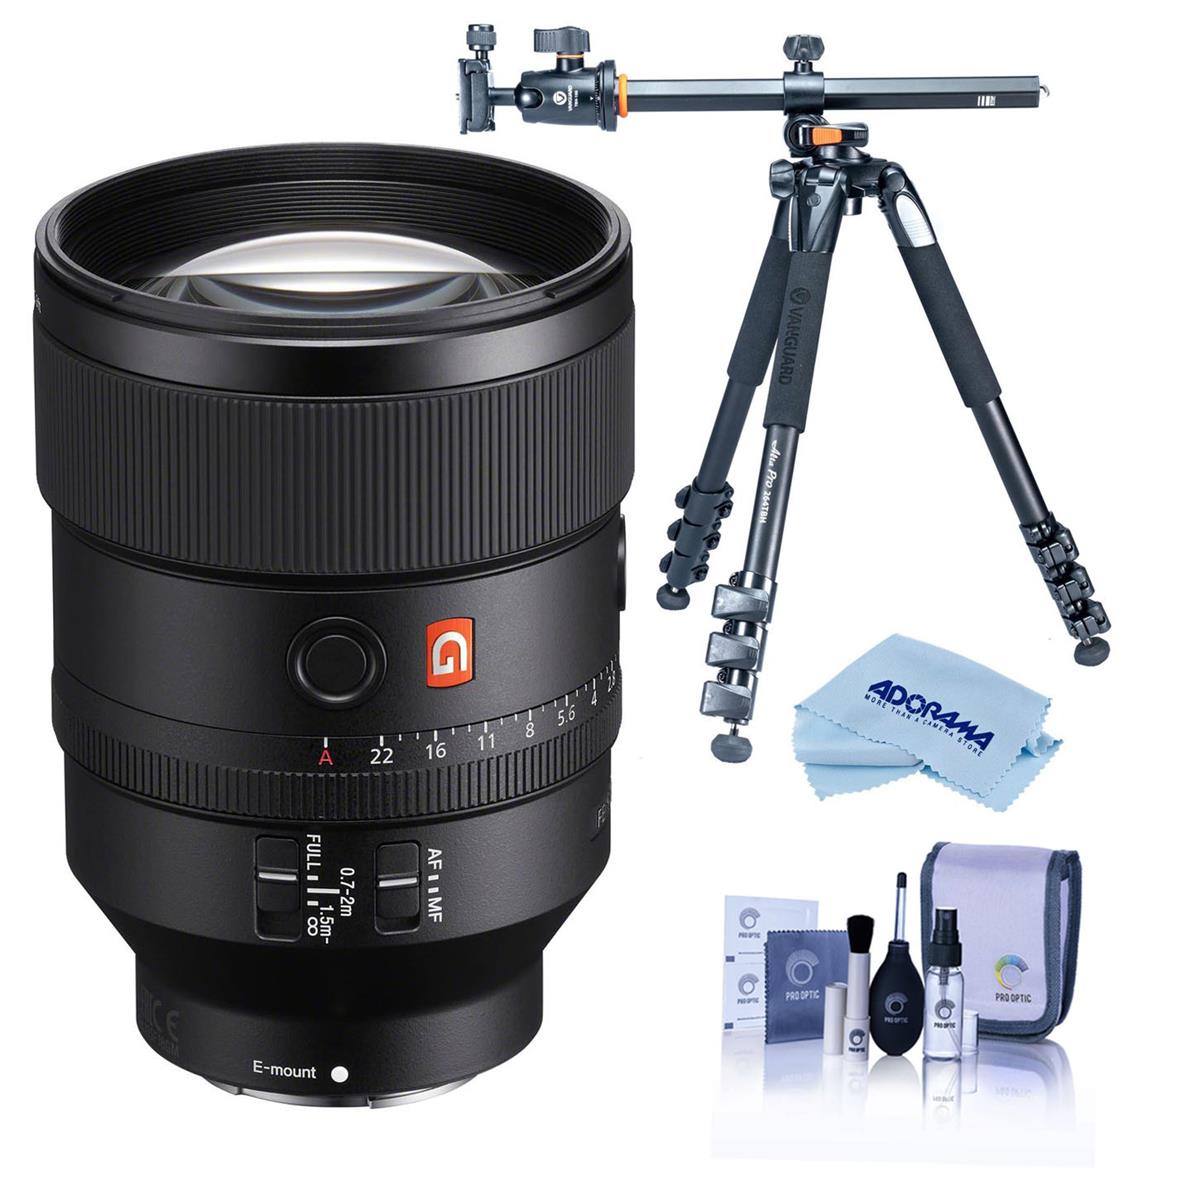 Image of Sony FE 135mm F1.8 GM Lens for Sony E with Vanguard Alta Pro 264AT Tripod Kit